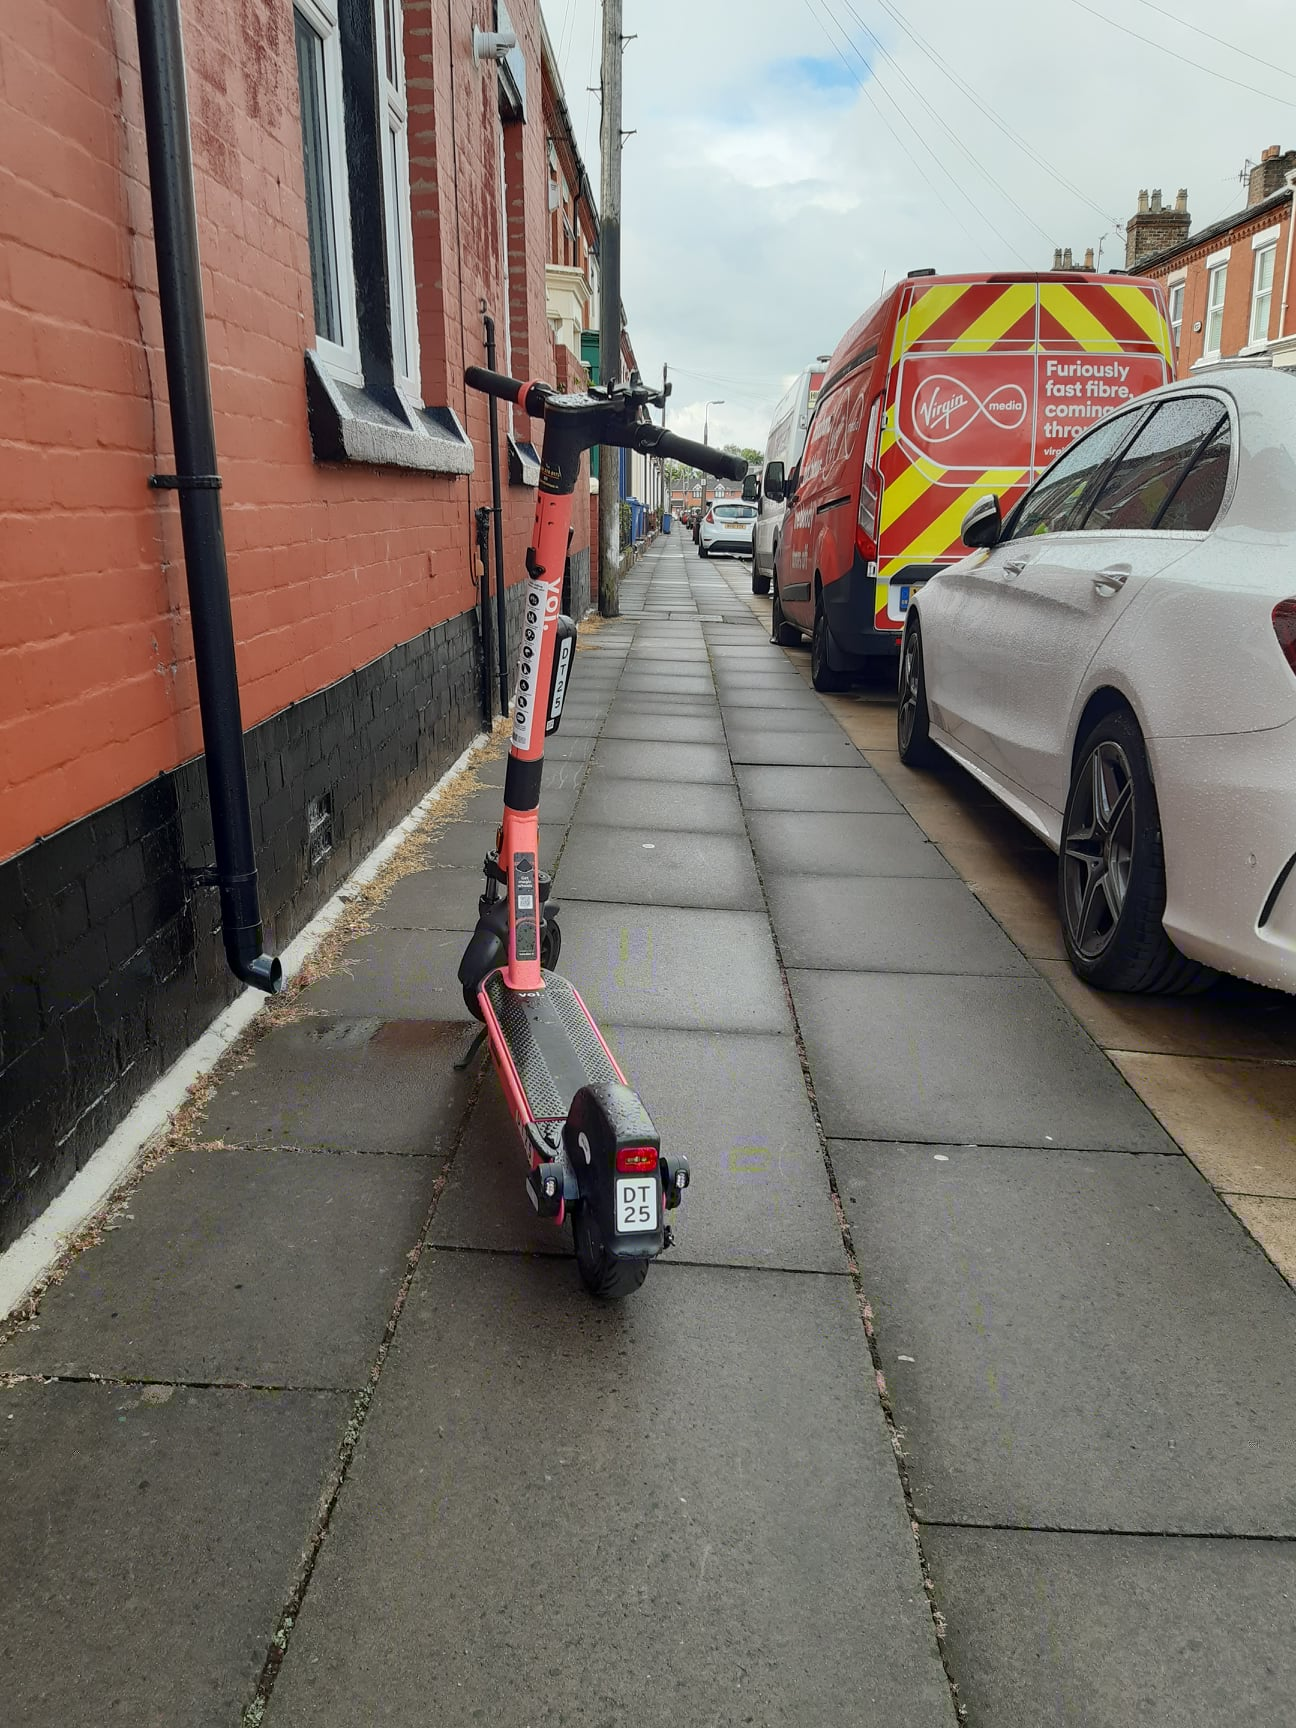 An e-scooter abandoned on the pavement